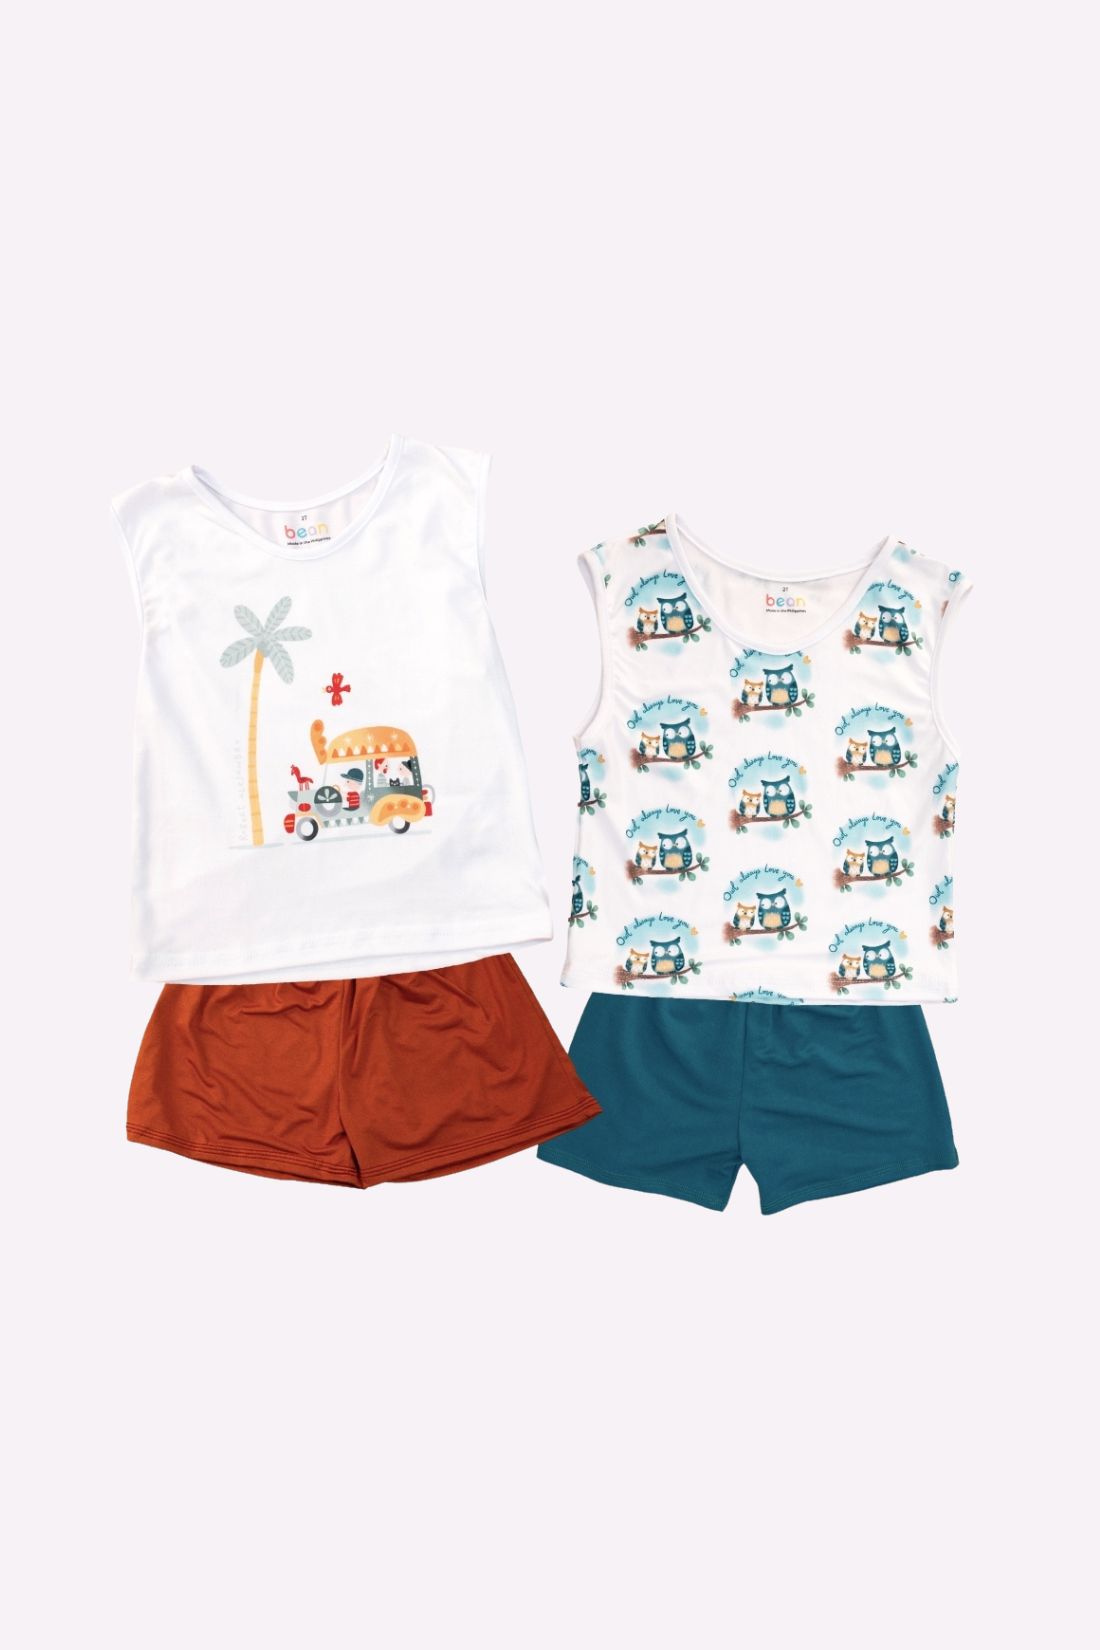 Set of 2 Tank Tops Shorts Jeepney and Owl